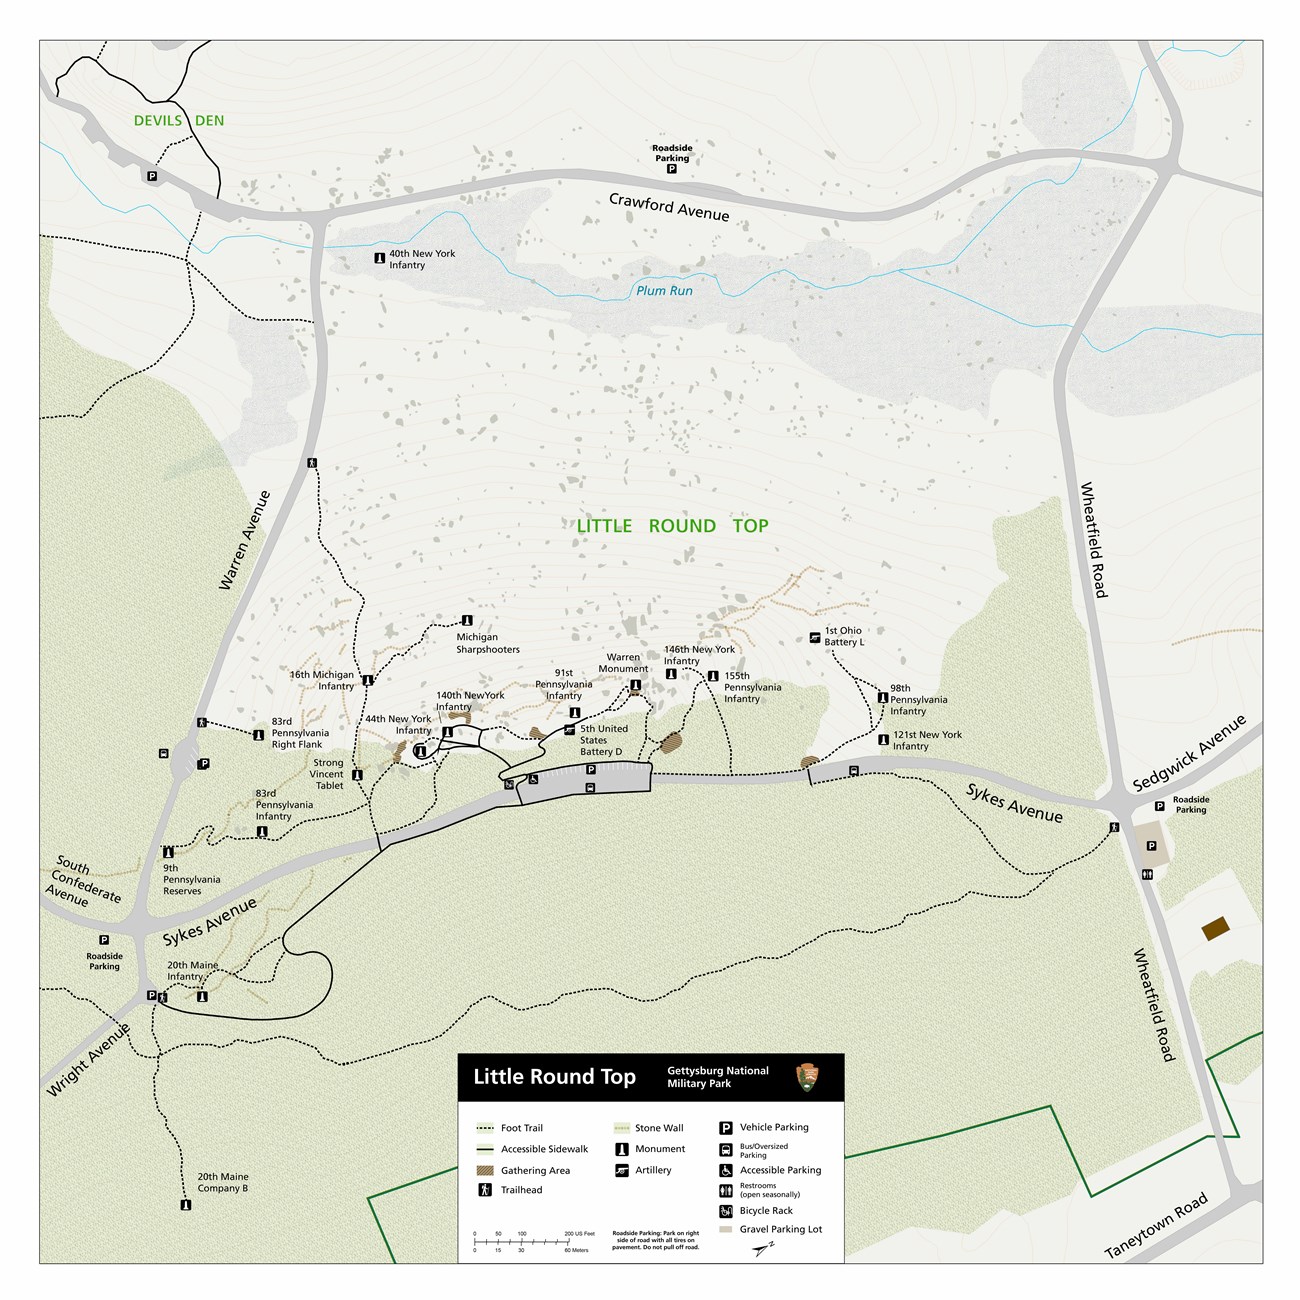 A map of the Little Round Top area showing trails, trailheads, parking, and icons for monuments and cannons.